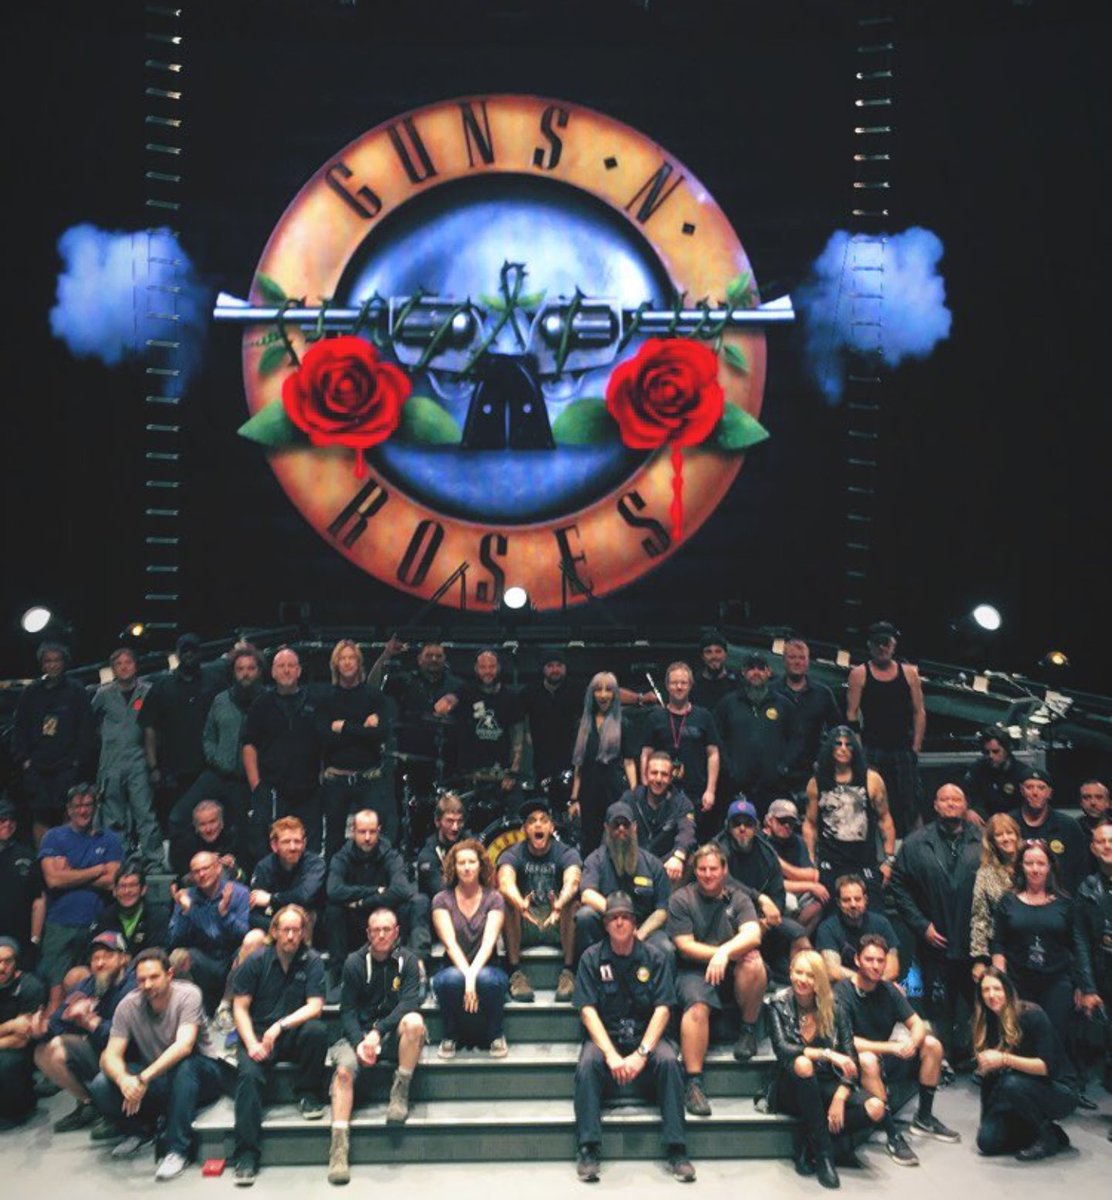 Guns n' roses los angeles forum final night tour not in this lifetime crew 2017